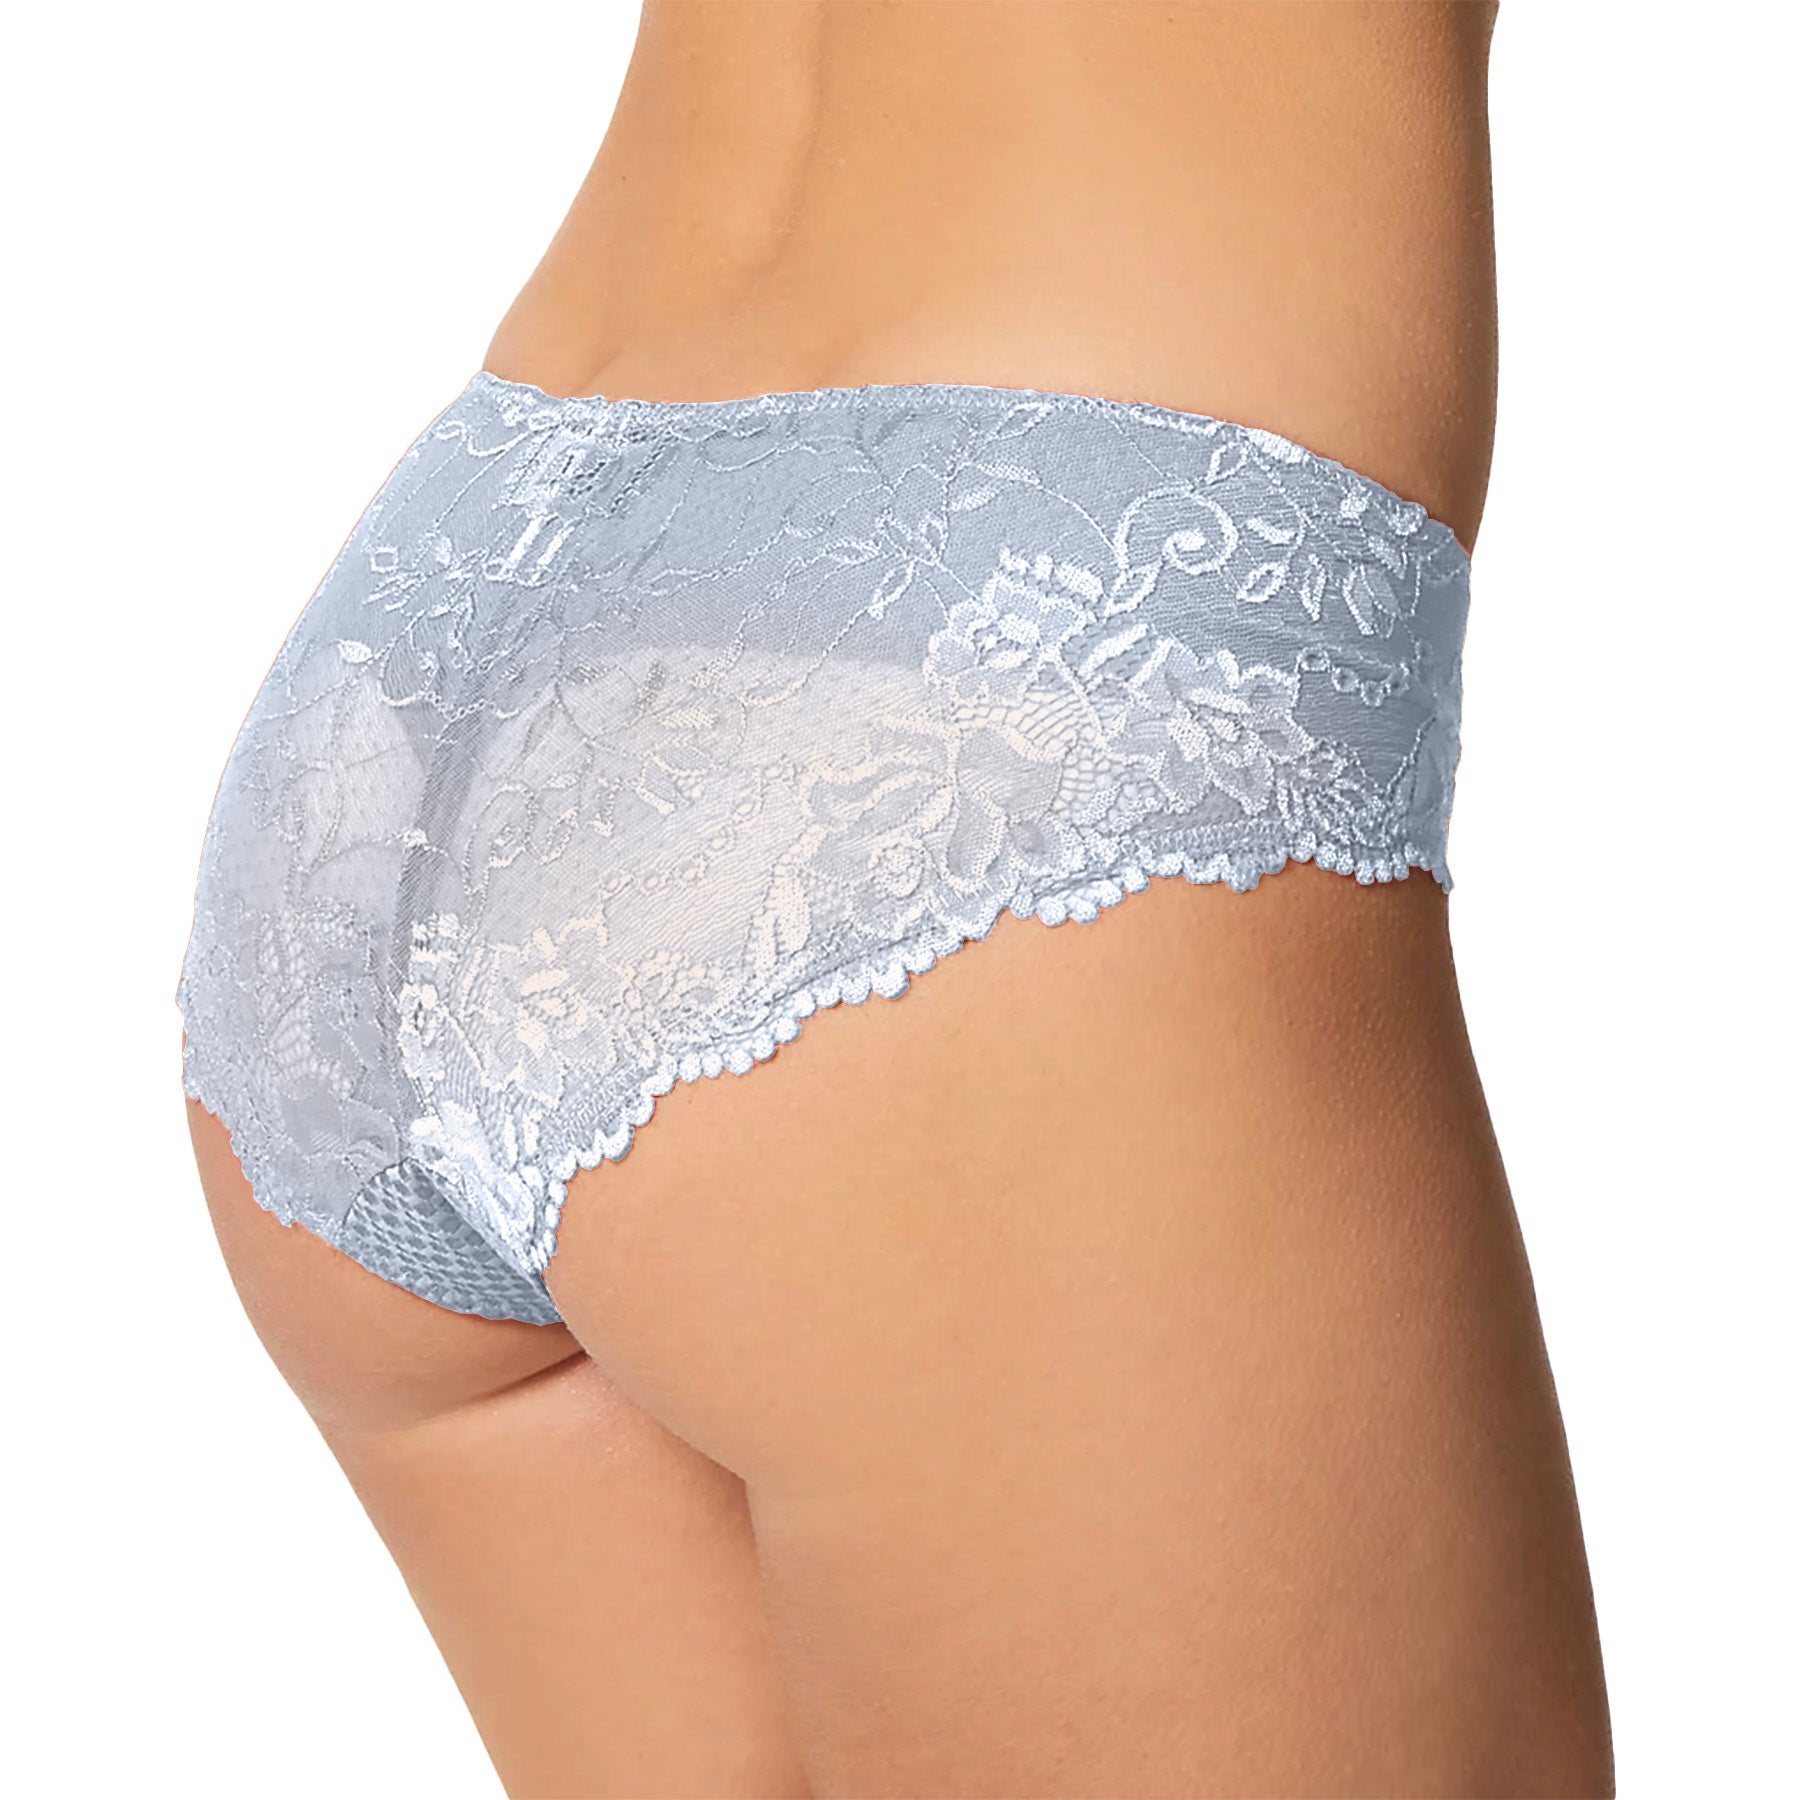 Fit Fully Yours Serena Bikini With Lace U2762 Steel Blue Rear View